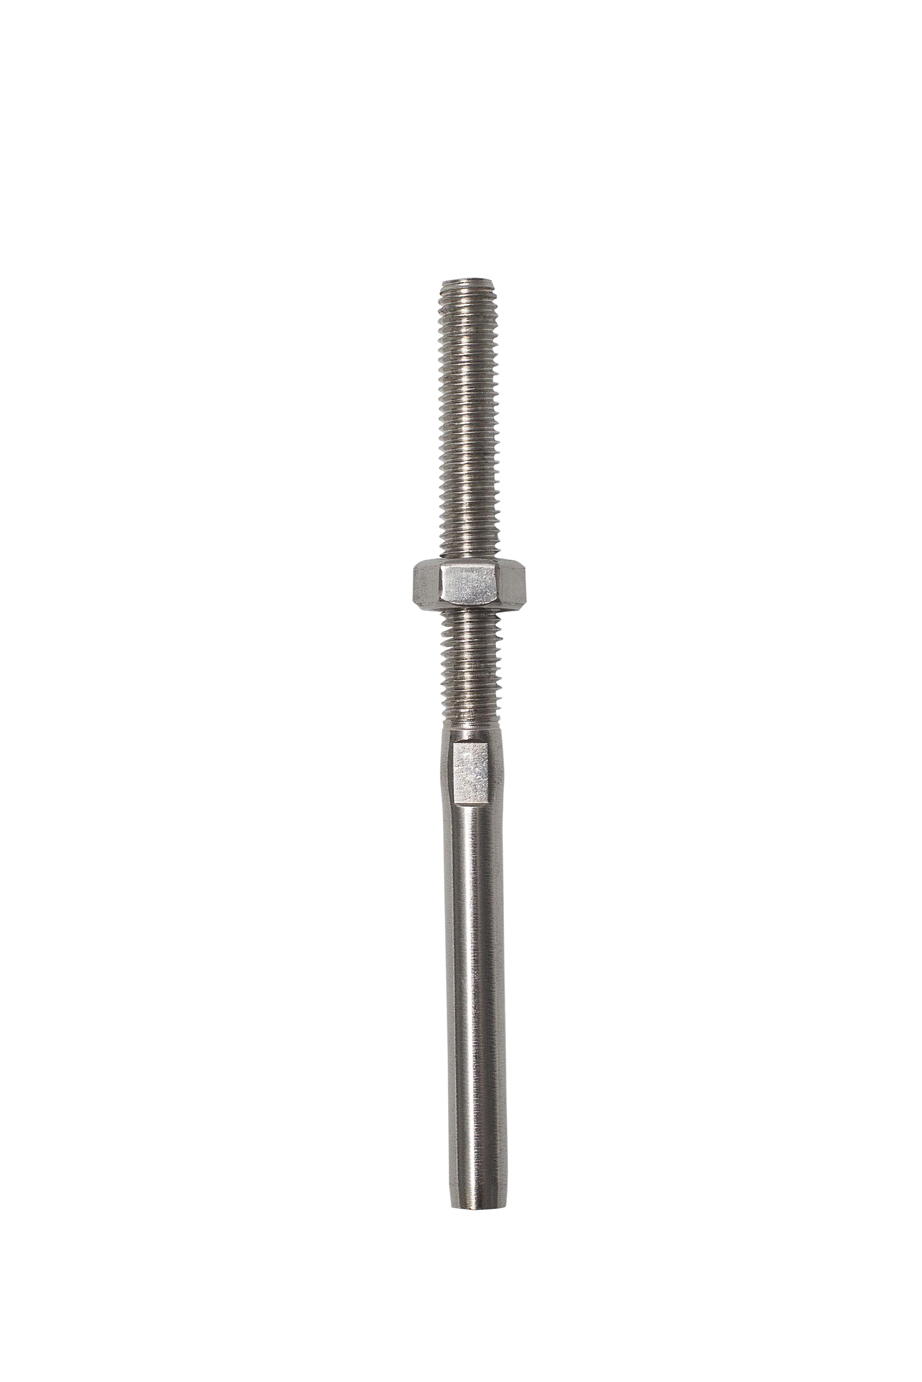 AISI 316 Marine Grade Stainless Steel Swaged Fork Terminal For 2mm Wire